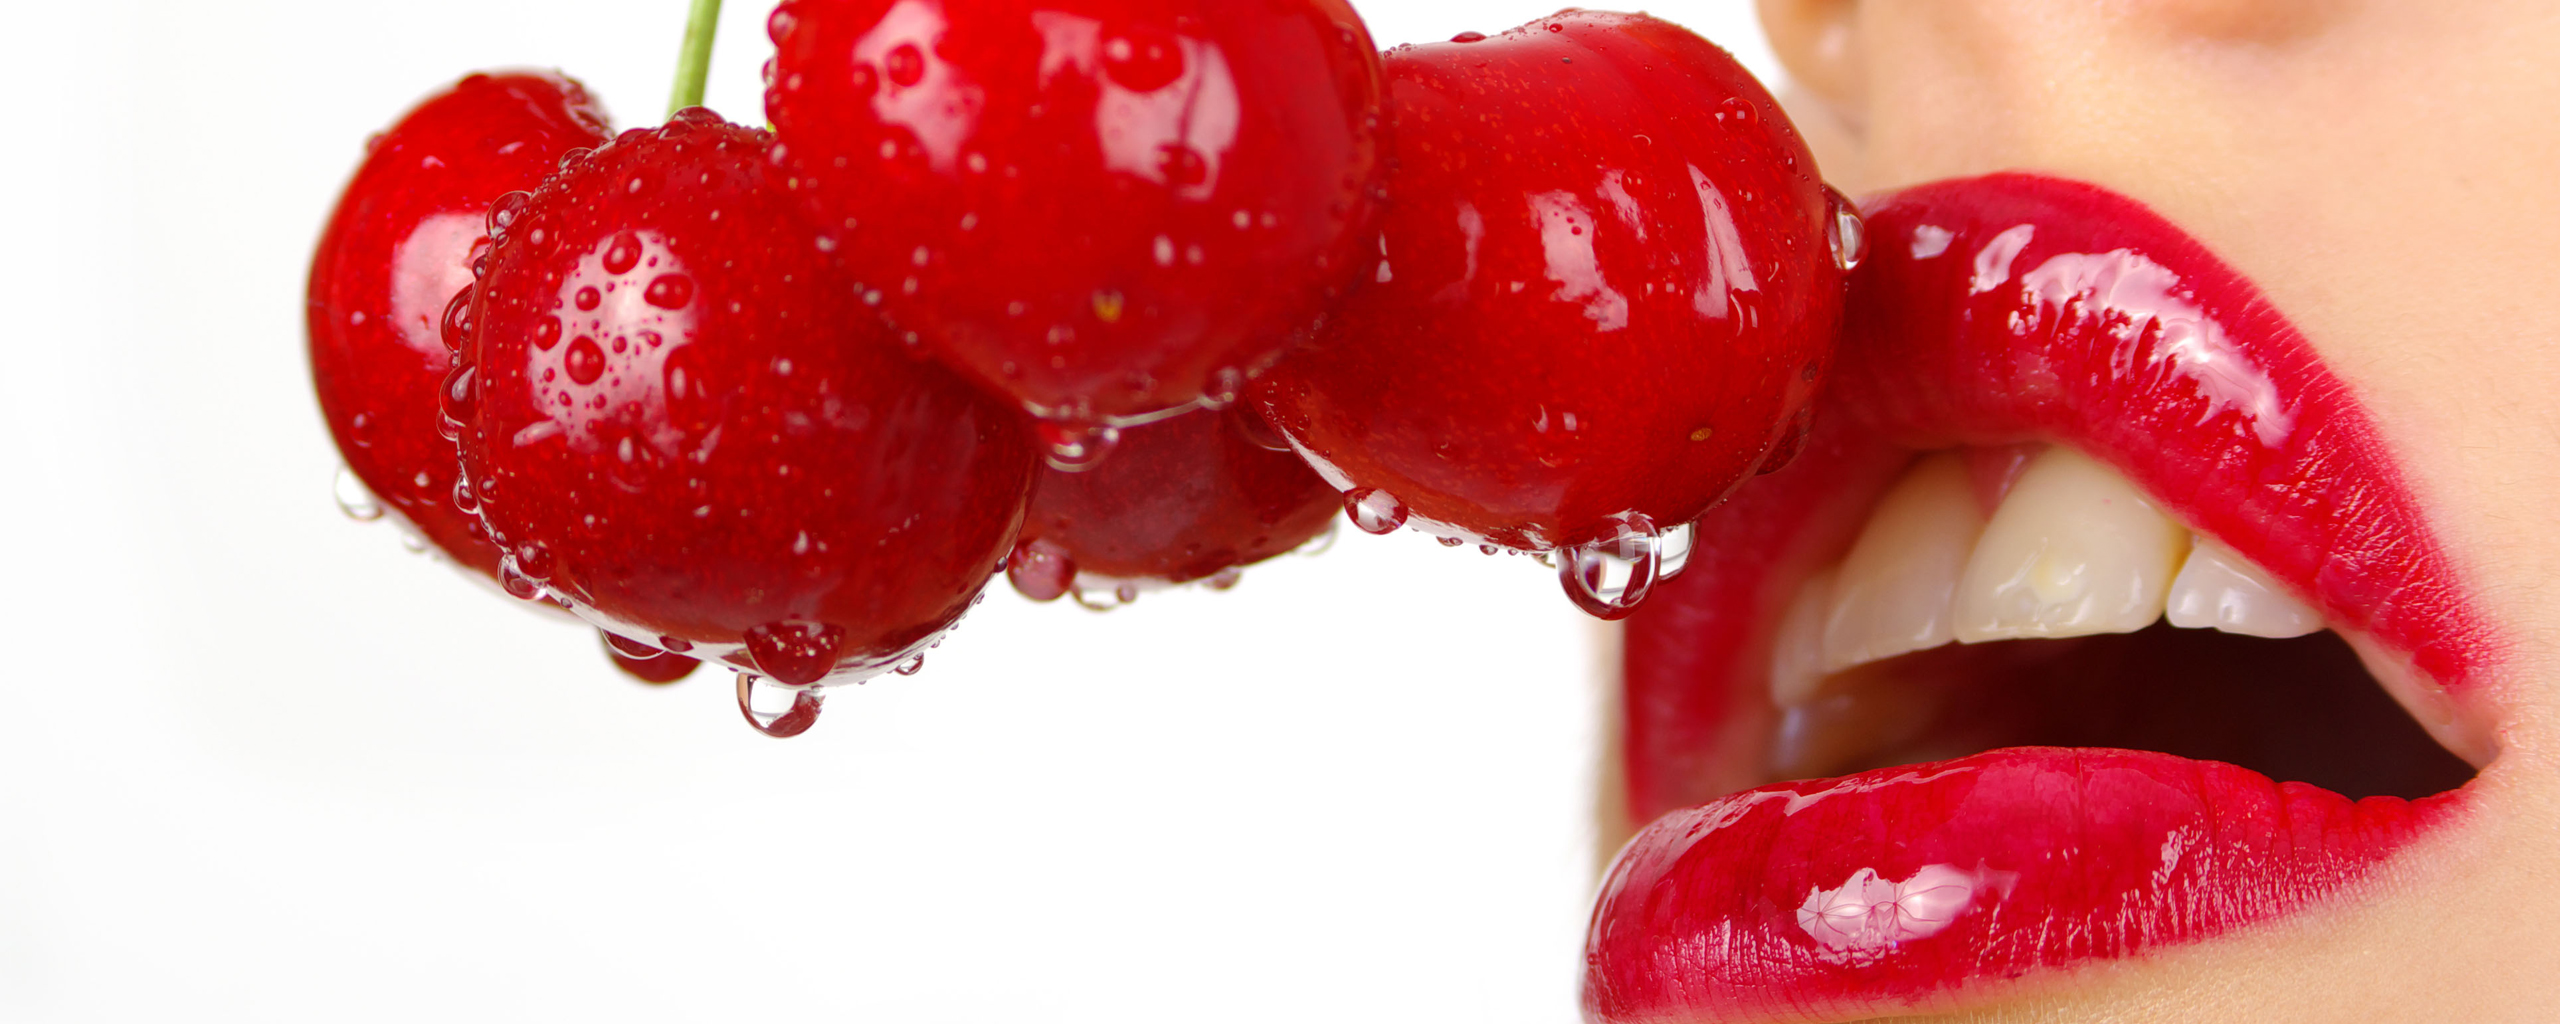 Red Cherry Hd Wallpapers